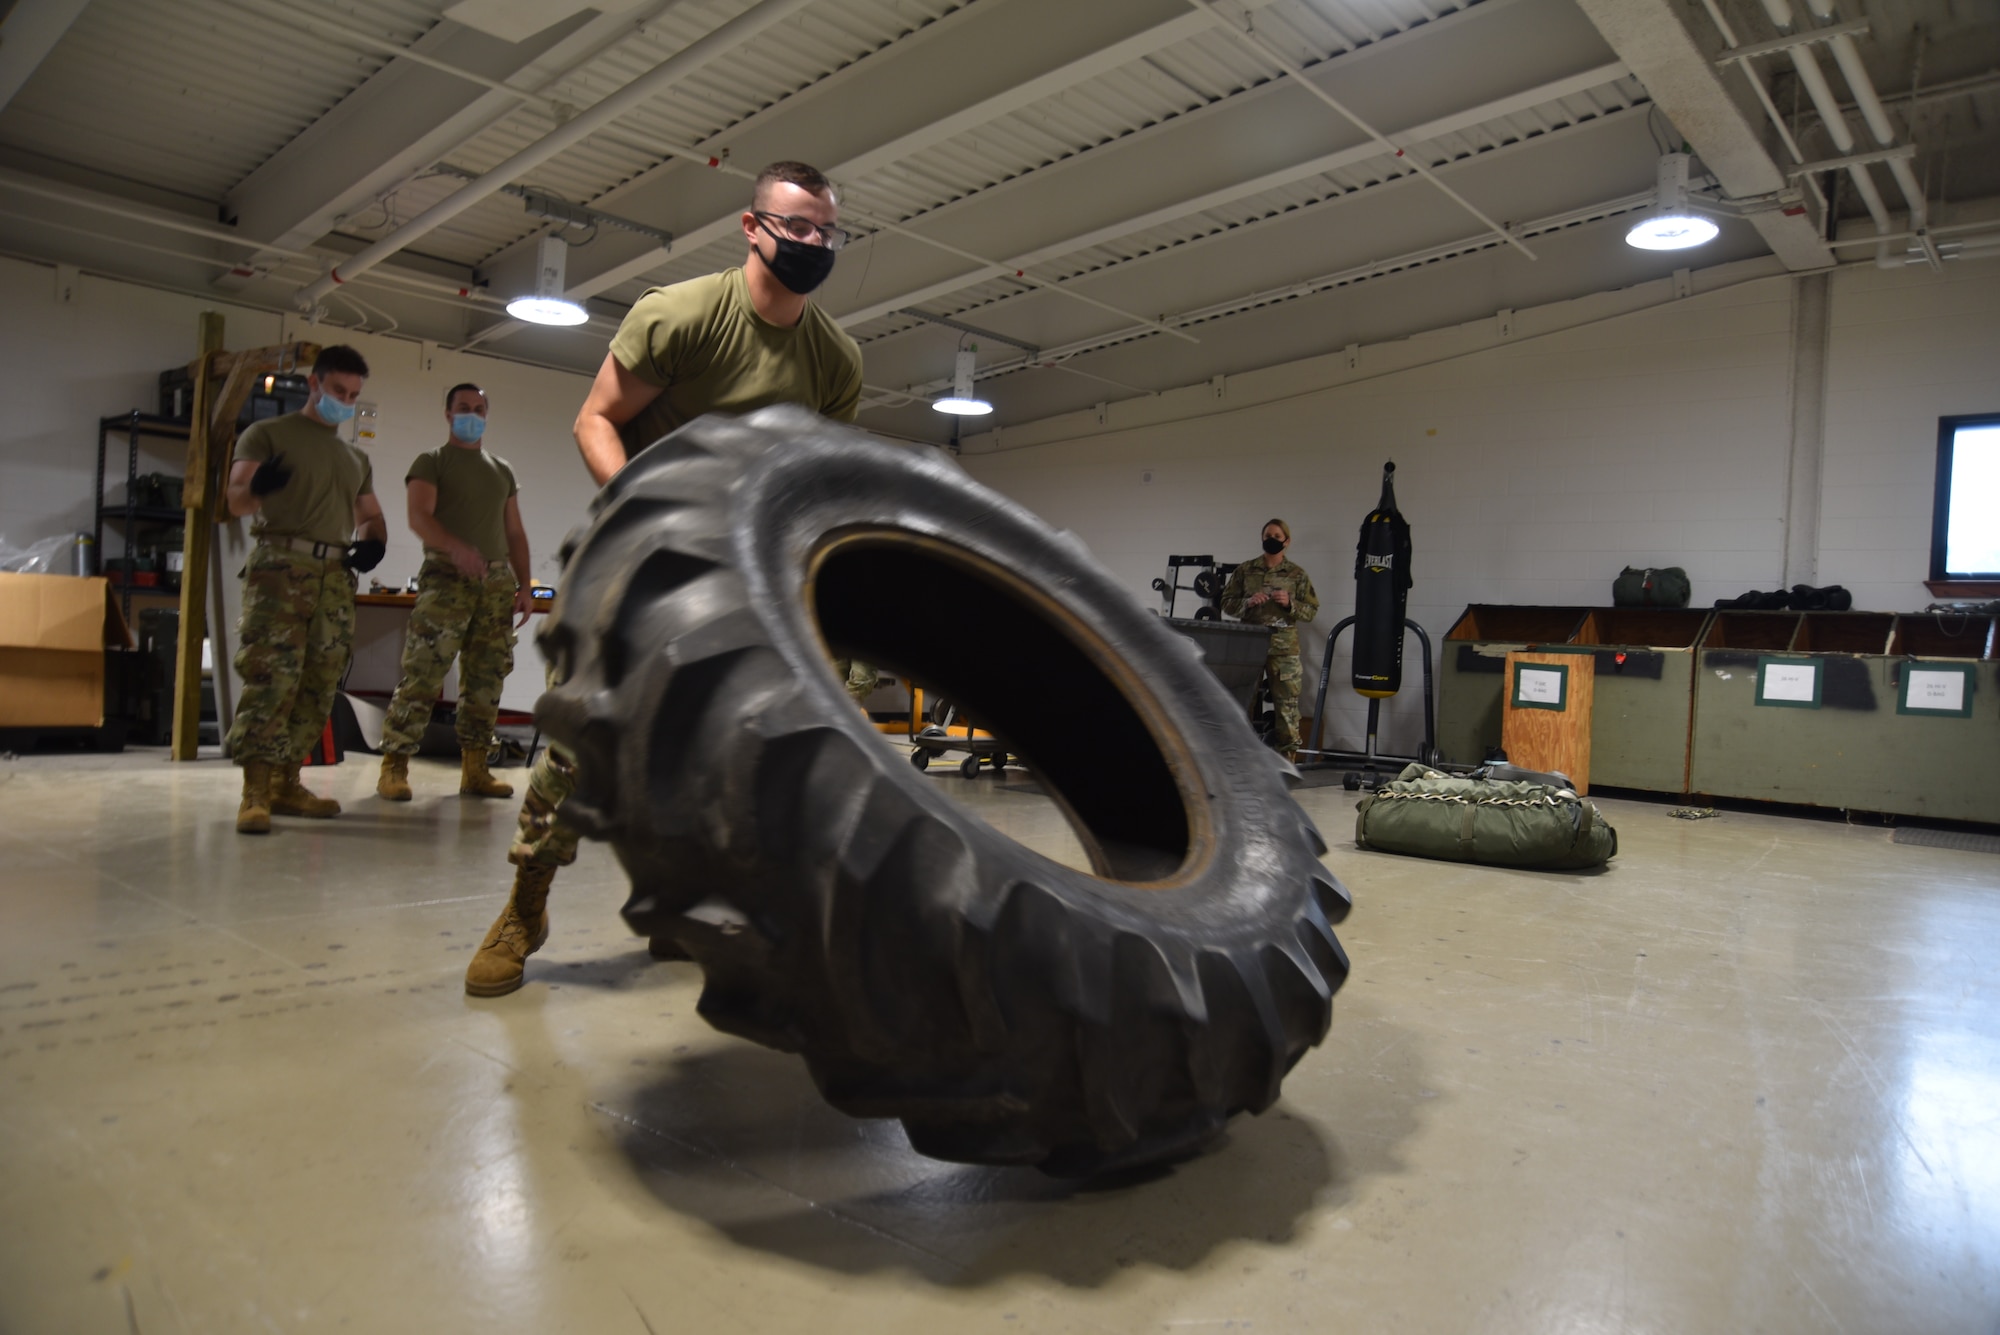 Staff Sgt. Nicholas Willig, 41st Aerial Port Squadron air transportation craftsman, participates in the "fit to fight" portion of the Port Dawg Challenge at Keesler Air Force Base, Miss., Oct. 2, 2021. This part of the fitness portion has Willig raising a heavy tire tread up to pitch it over multiple times as his teammates and evaluators observe. (U.S. Air Force photo by Tech. Sgt. Michael Farrar)